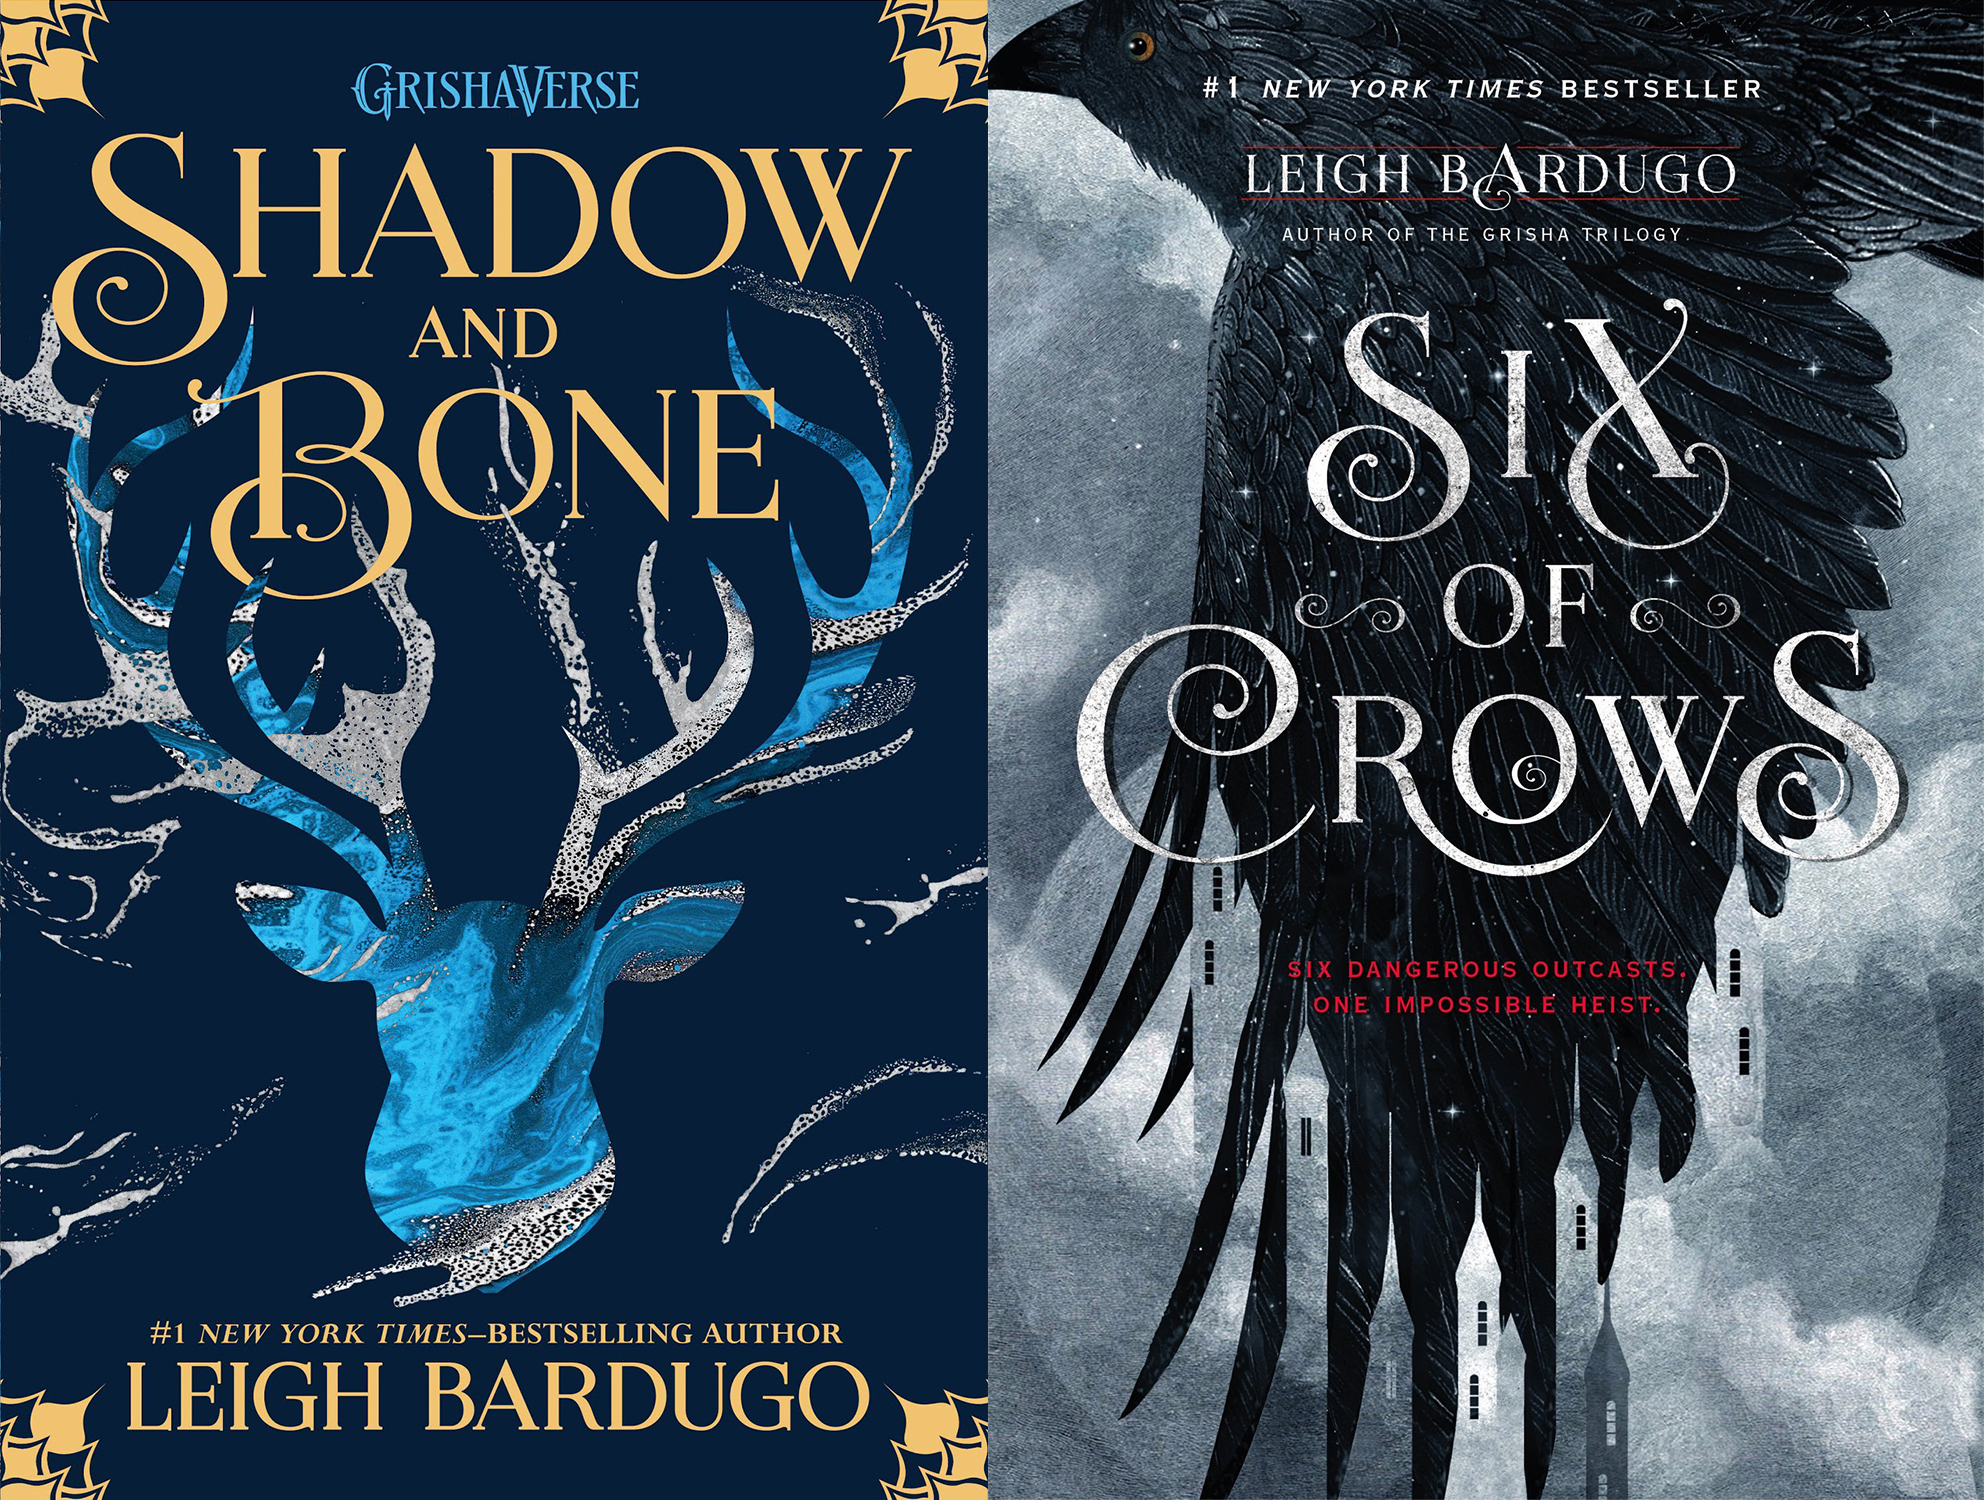 Cover art for Shadow and Bone and Six of Crows.